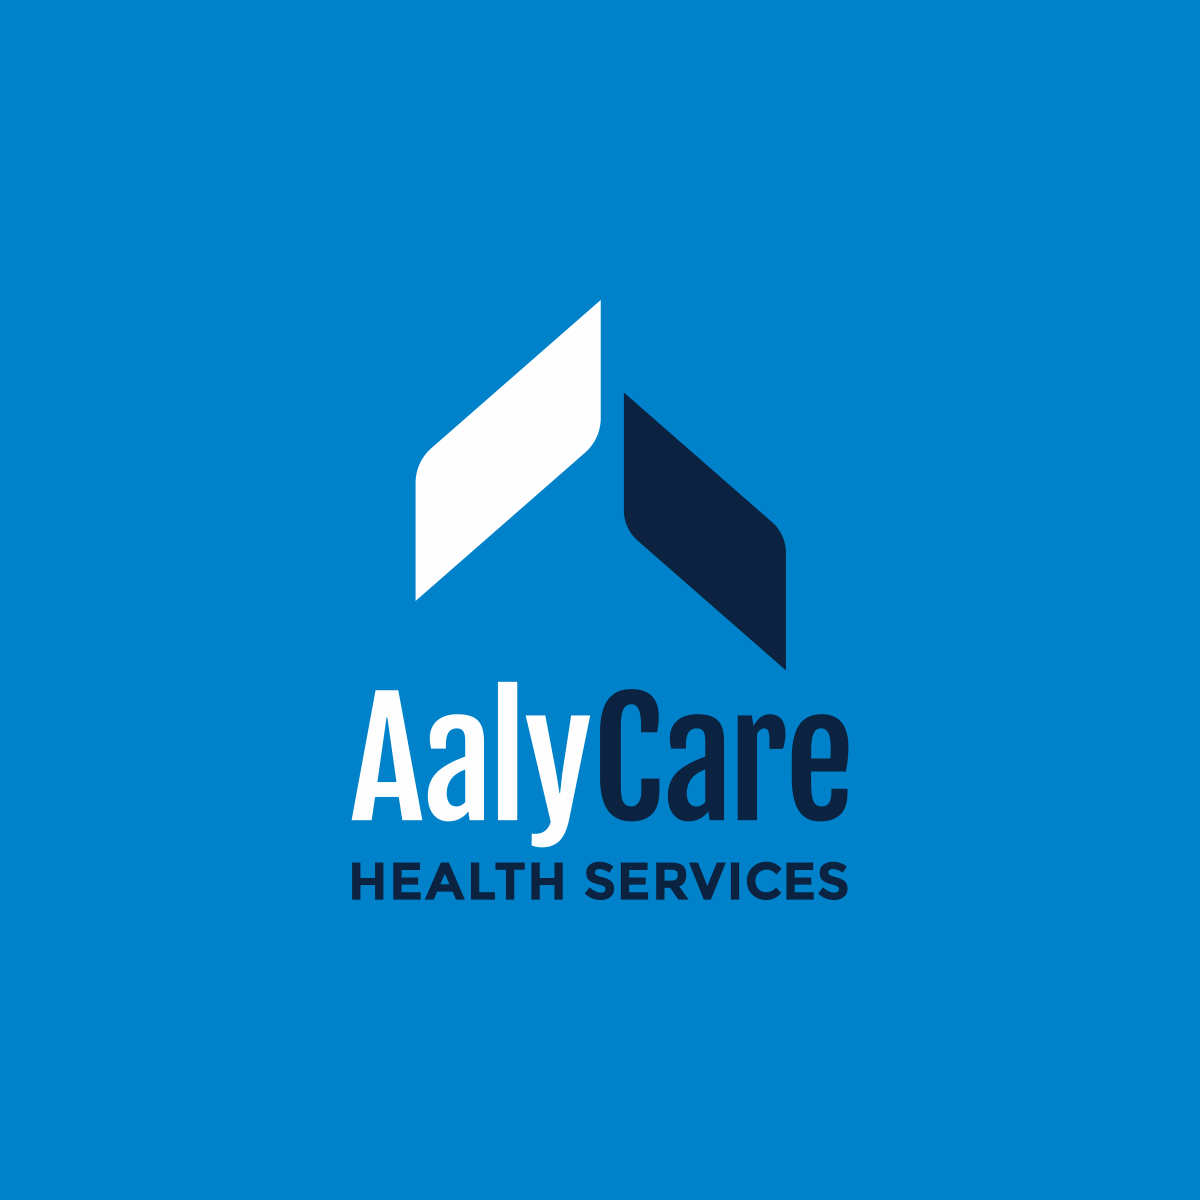 AalyCare Health Services